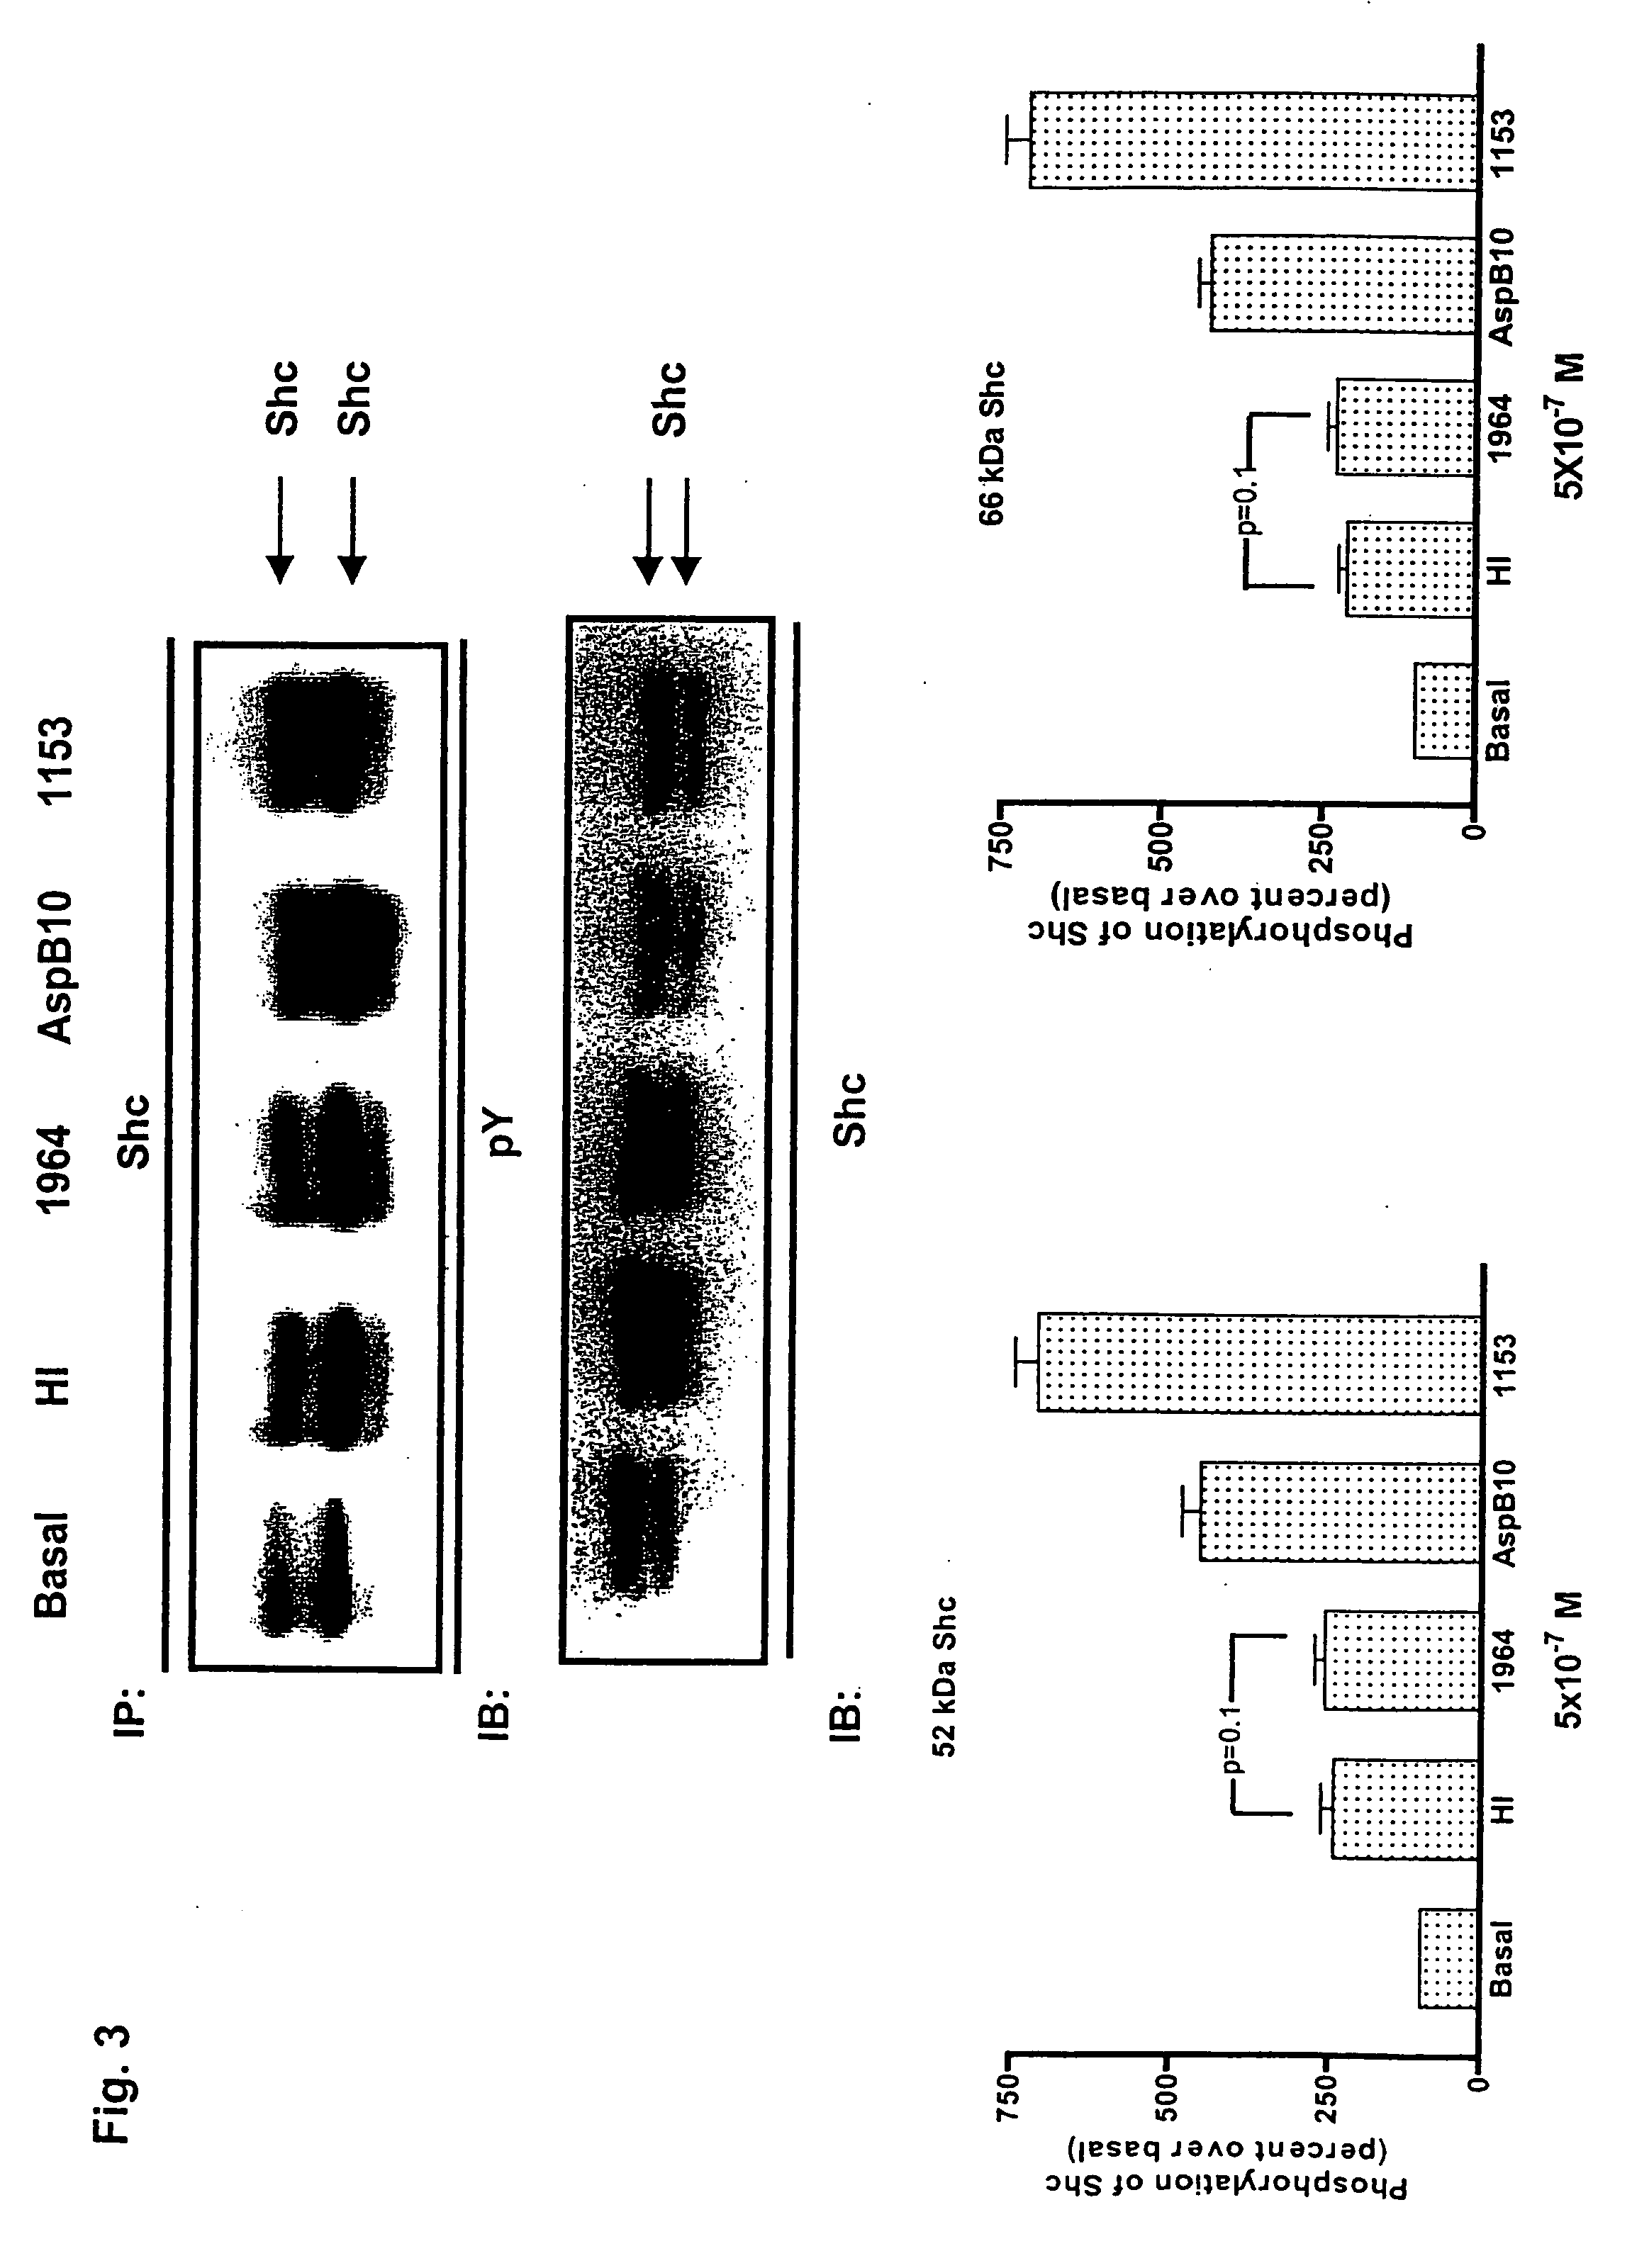 Method of activating insulin receptor substrate-2 to stimulate insulin production